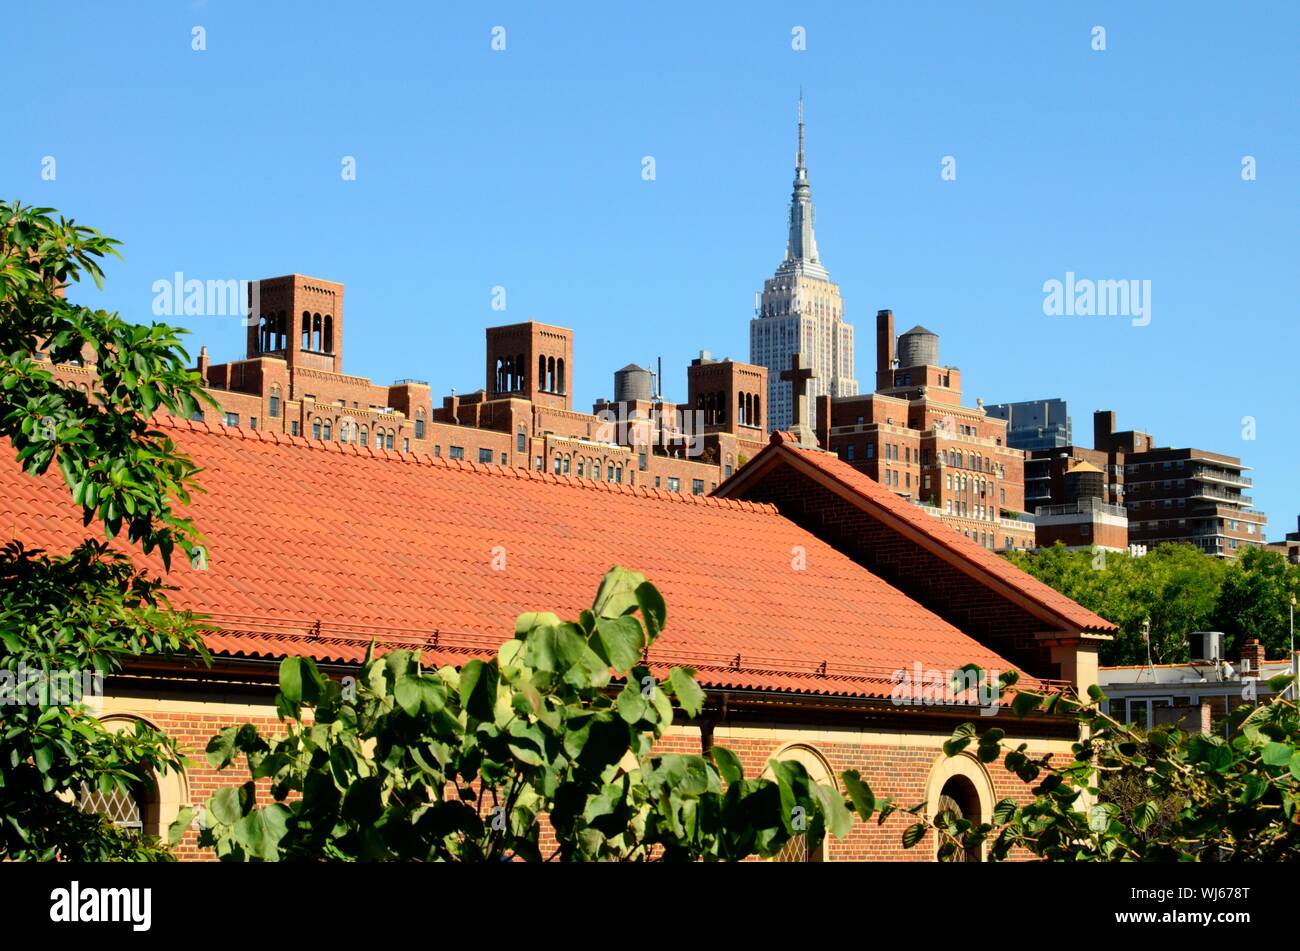 View from the High Line of buildings in Lower Manhattan, New York Stock Photo